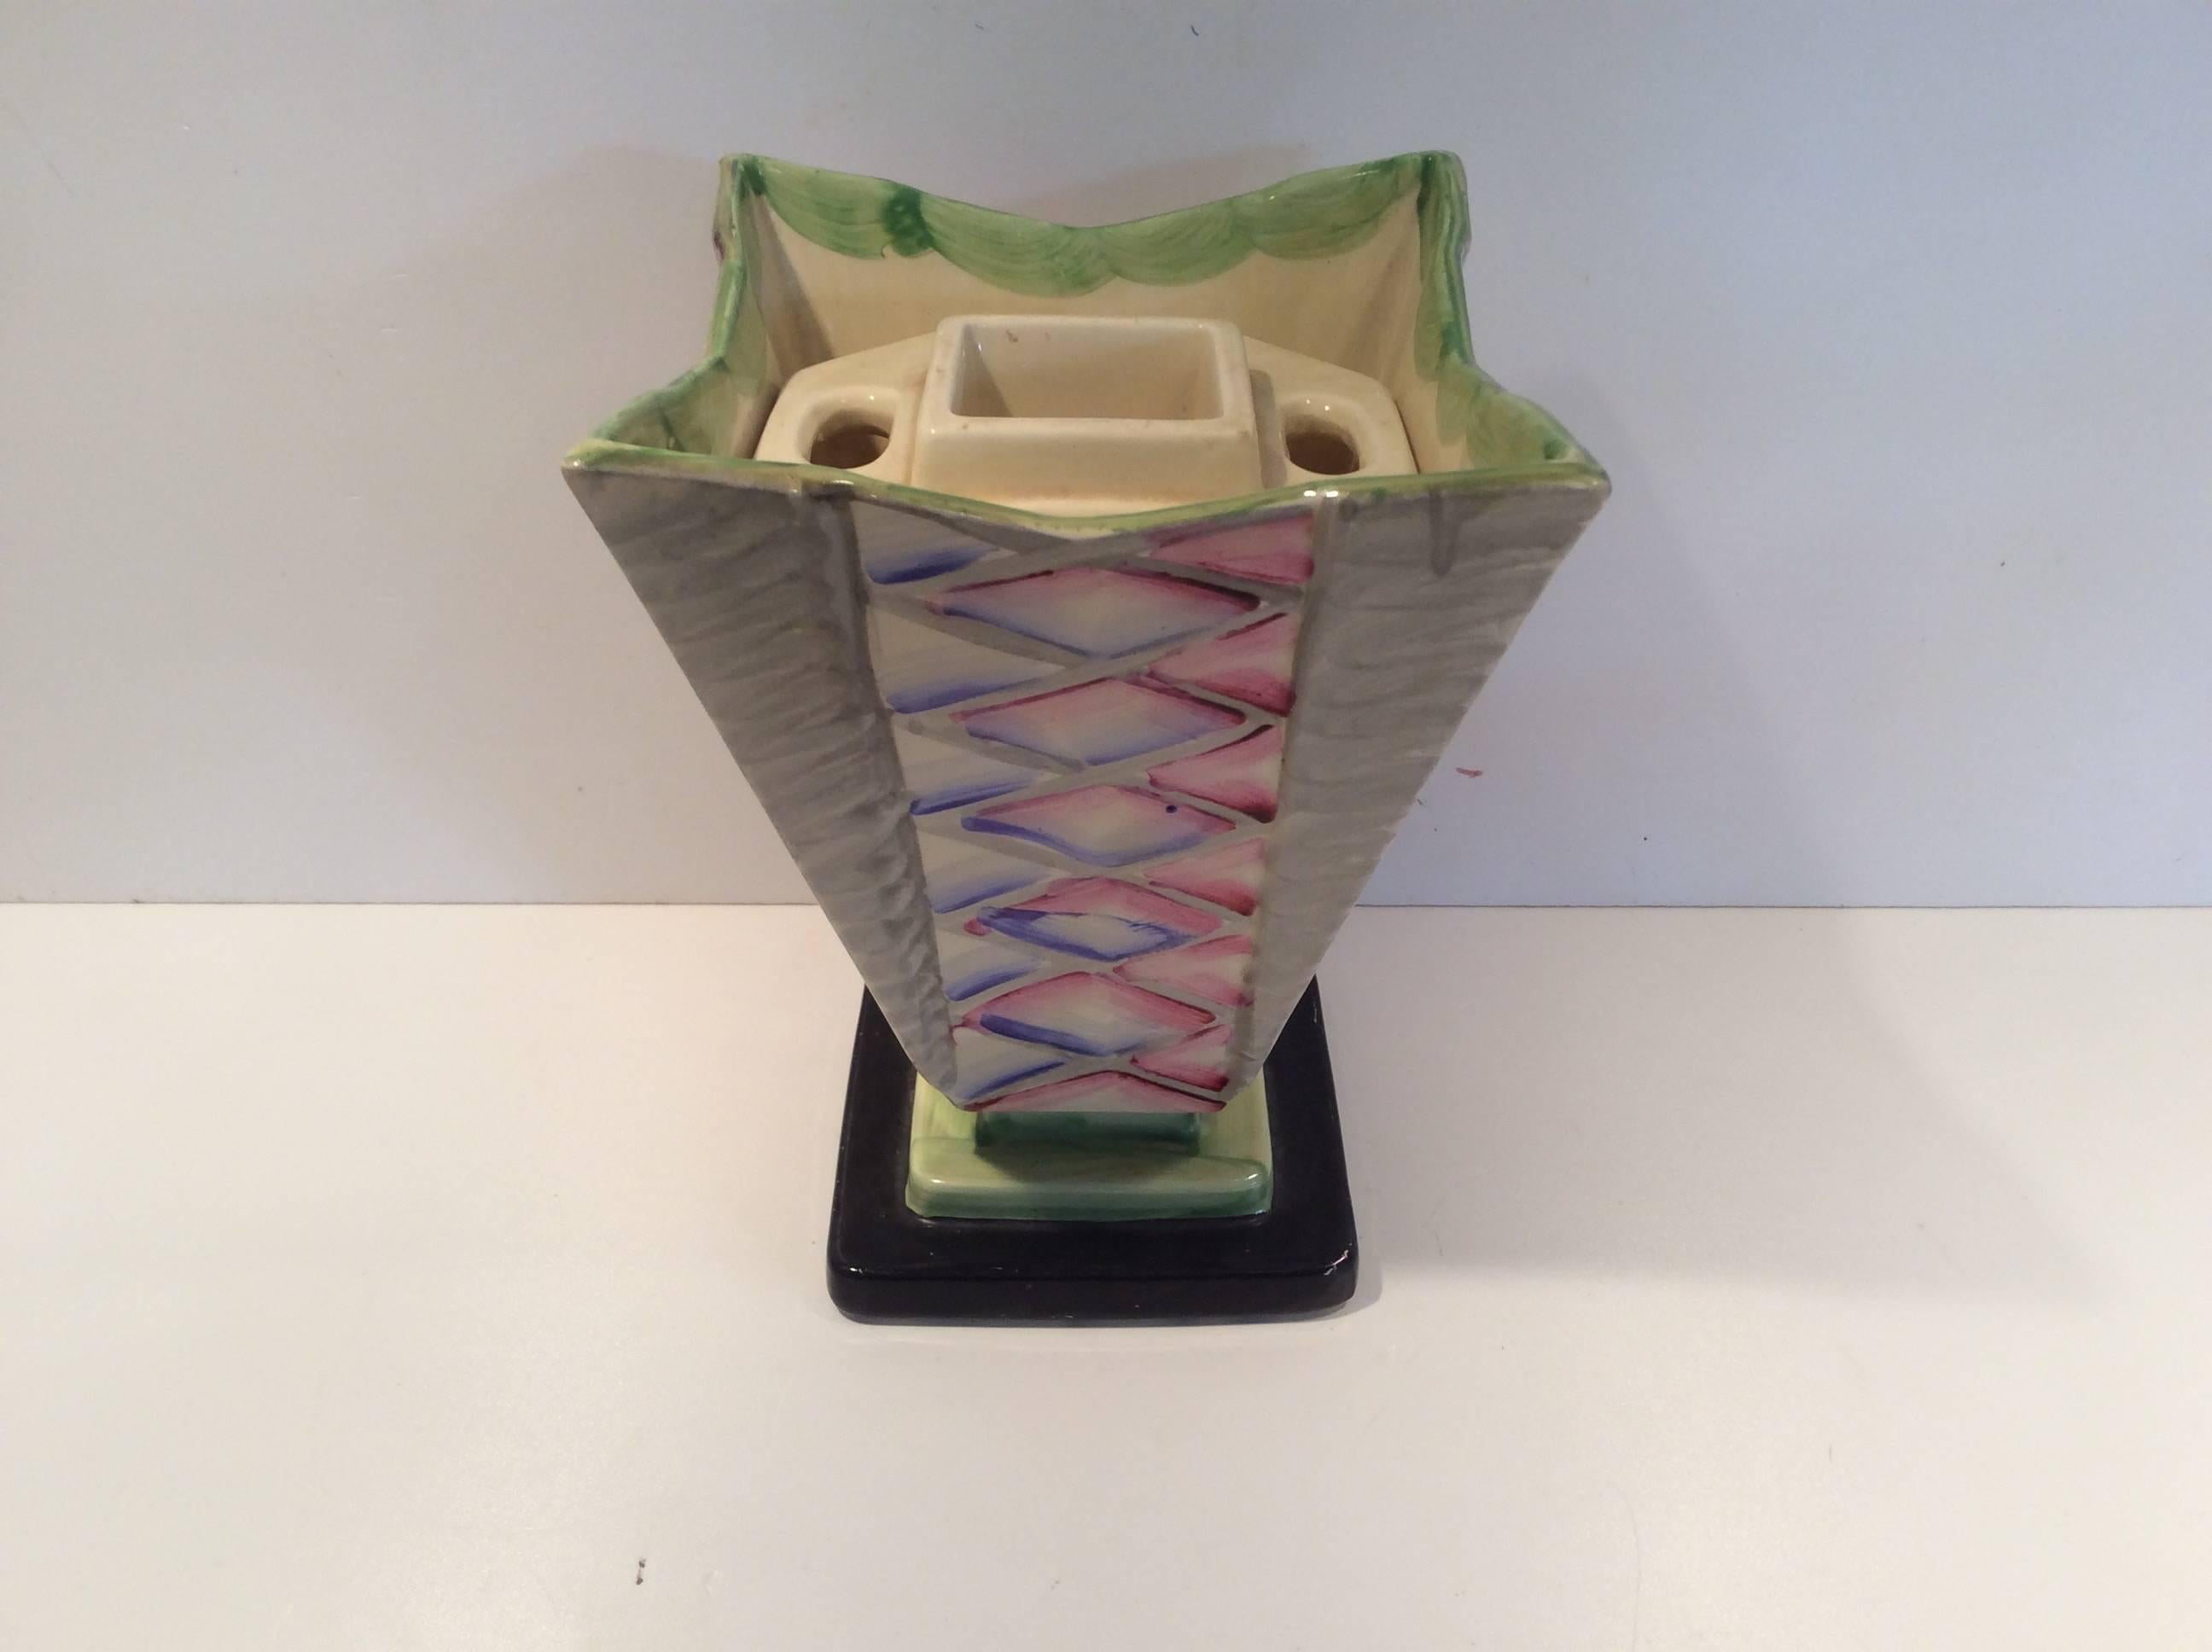 Unusual Art Deco hand-painted abstract design vase.
Star-shaped top to this striking original Art Deco vase.
Height to top is 18 cm 19 cm corner to corner and 14 cm sq. at the top.